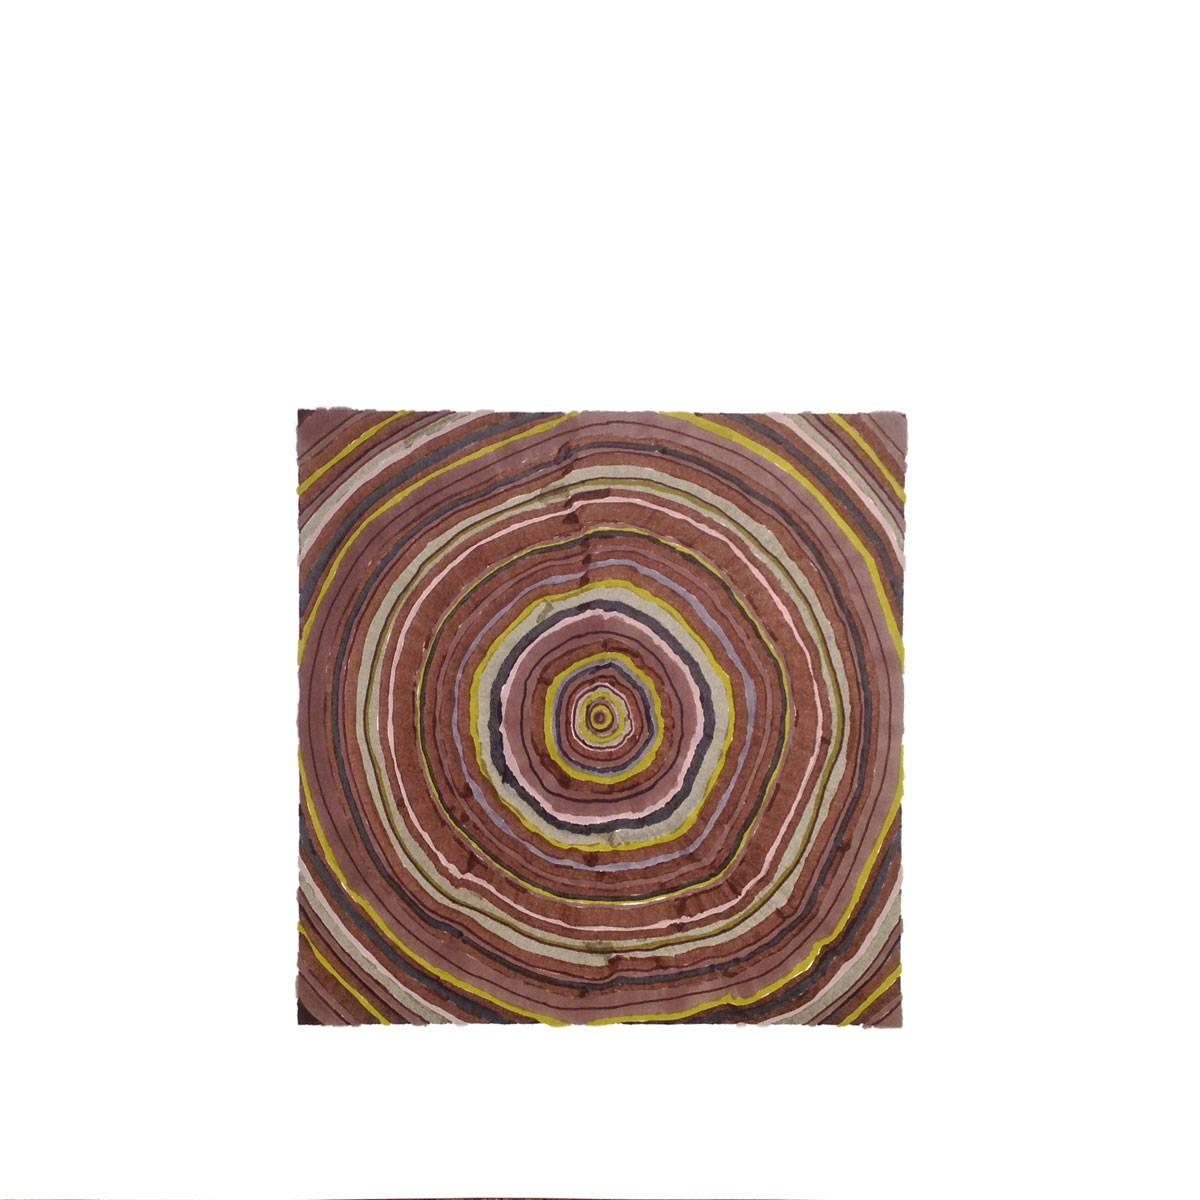 63 Years (Tree Rings Series) - Contemporary Art by Steven L. Anderson